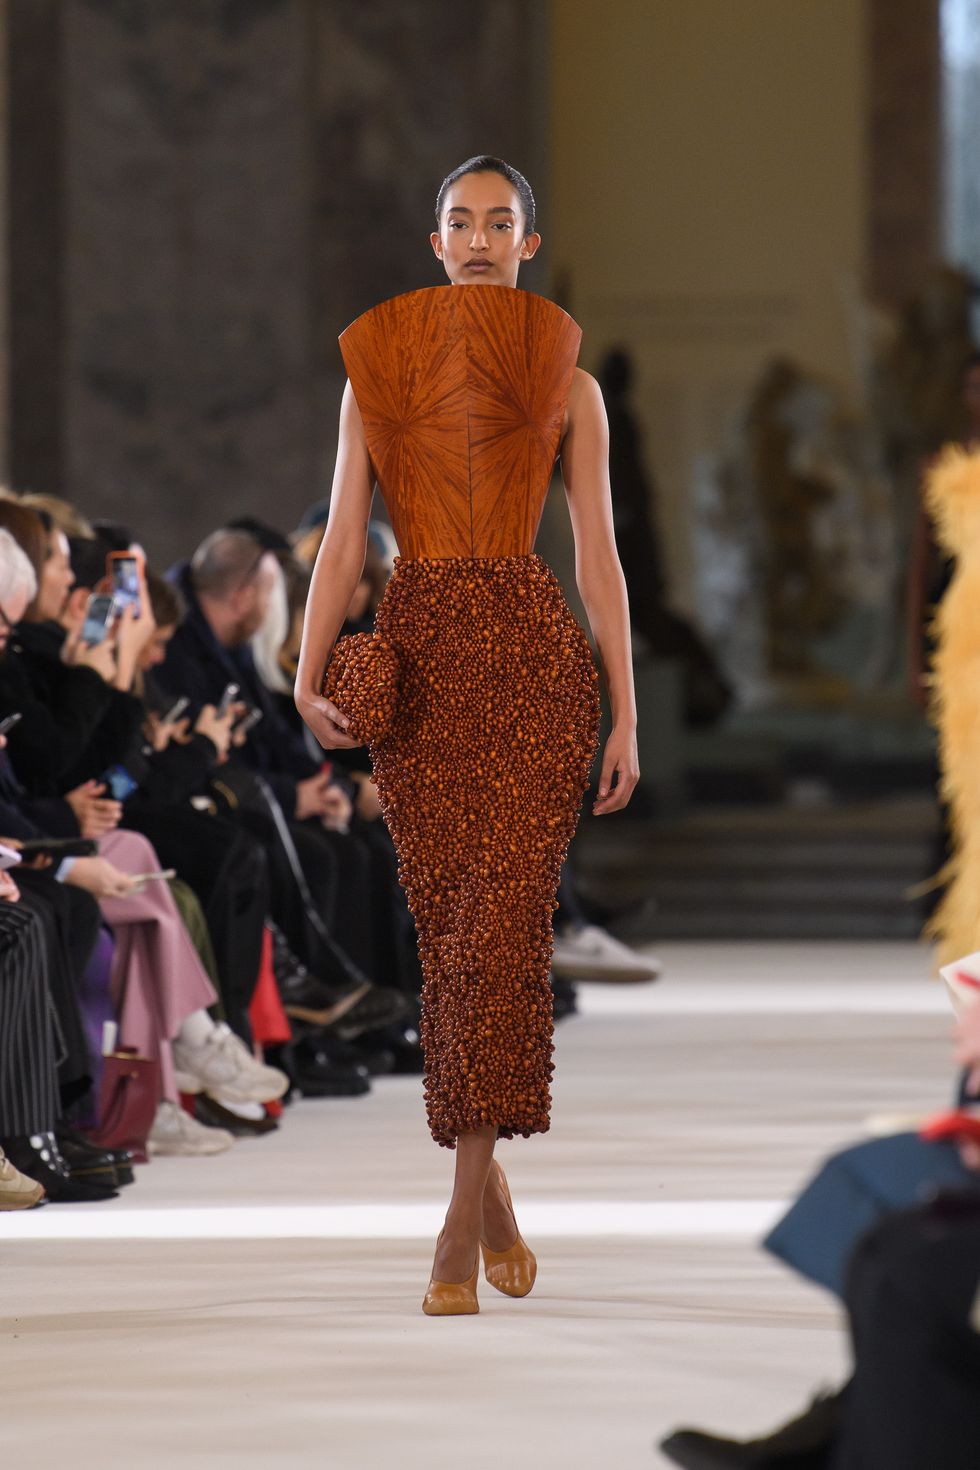 Oh my, lions, leopards, and she-wolves! With his most recent collection for the renowned company, Schiaparelli's creative director Daniel Roseberry set the tone for couture week in a surrealist manner.